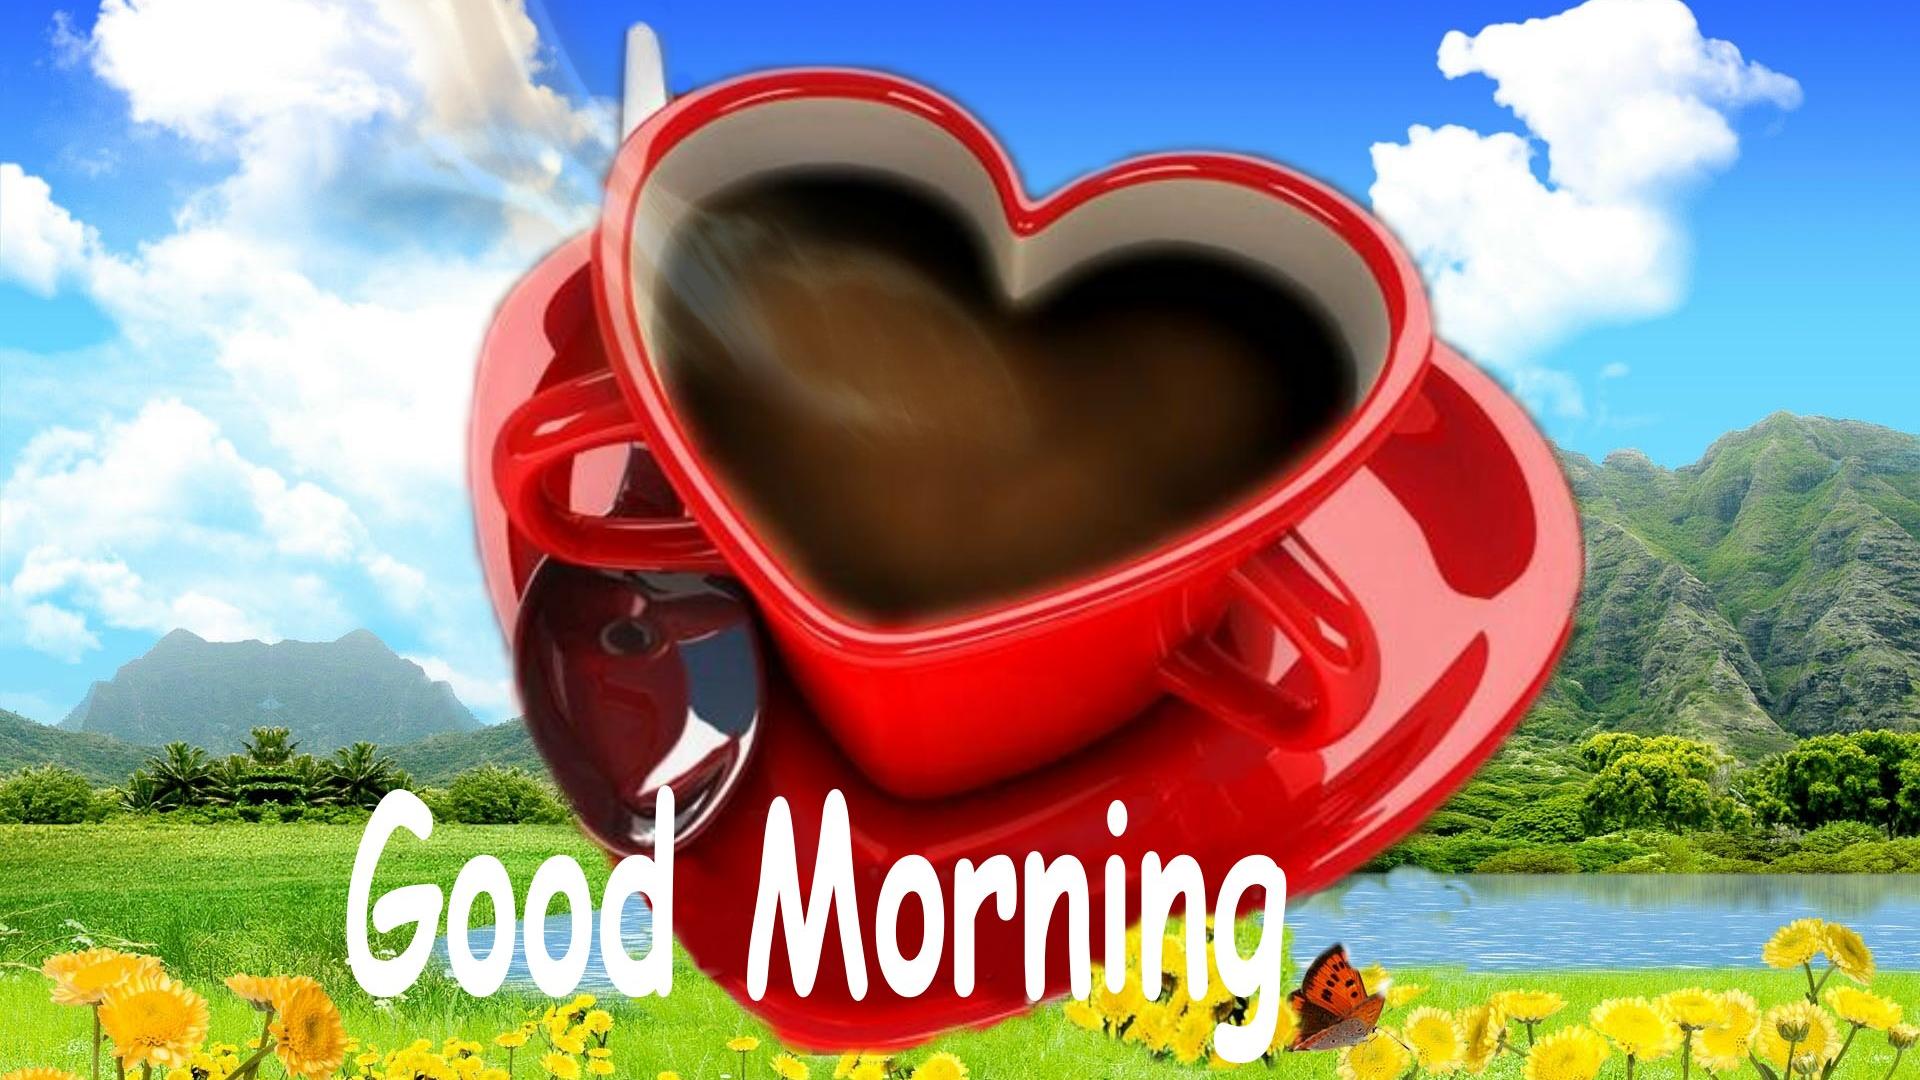 Love Good Morning Images HD Wallpaper of Greeting